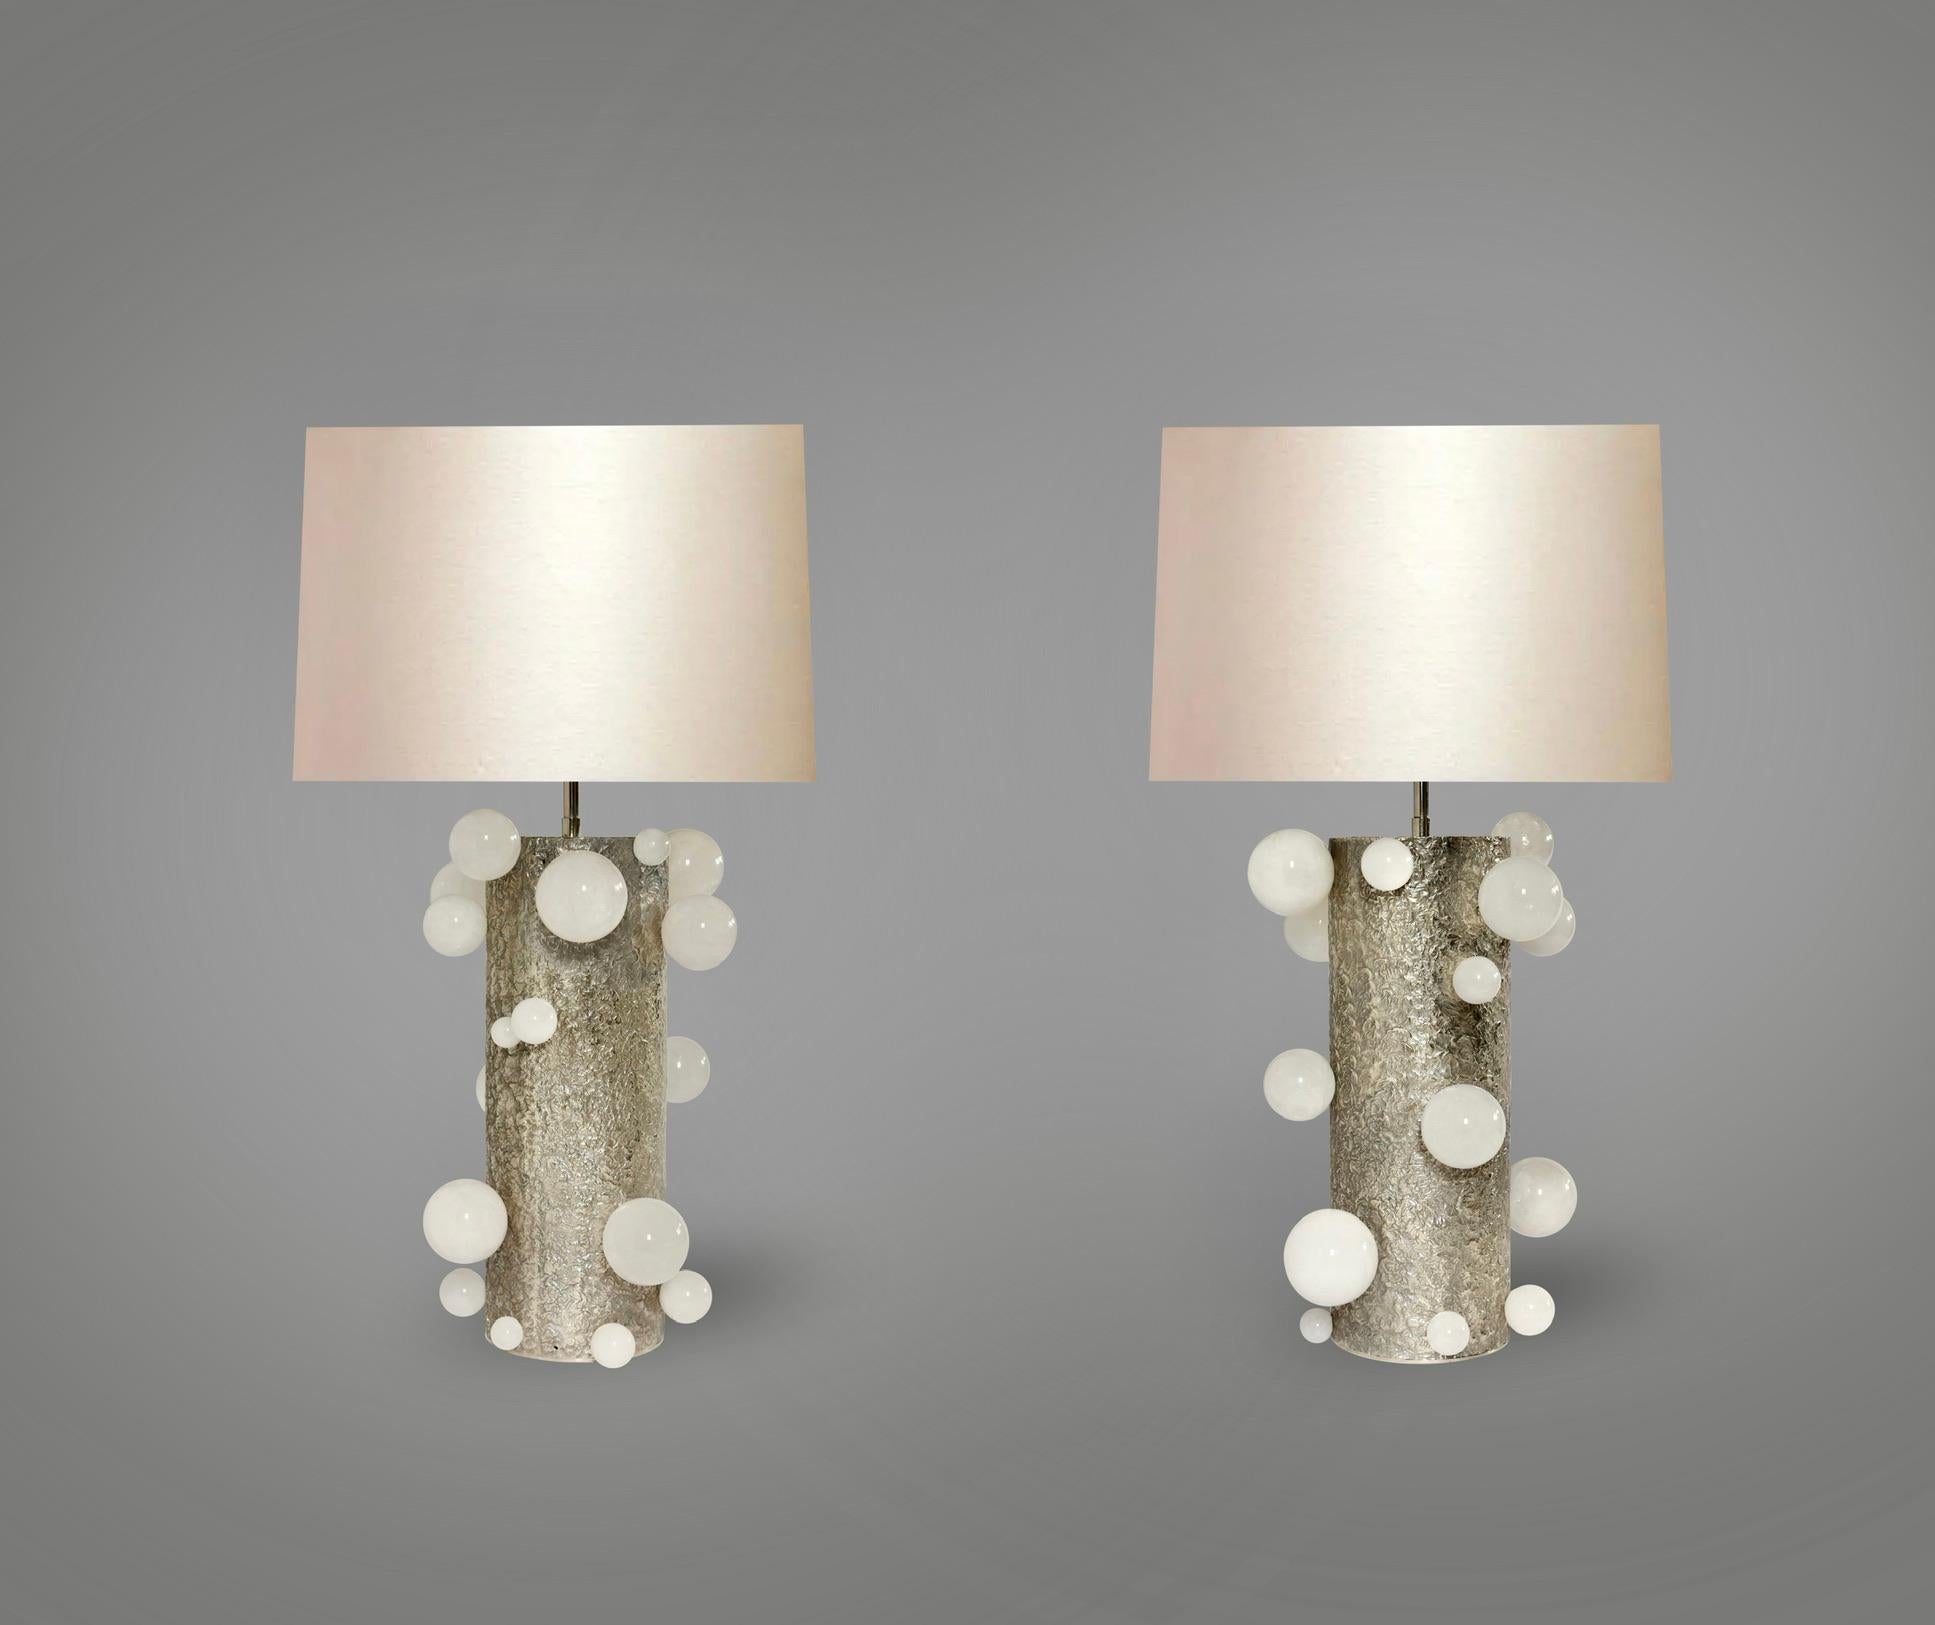 White rock crystal bubbles with hammered nickel finish stand,to the tops of the stand 16.5 inch 
Lamp shades are not included.
Created by Phoenix.